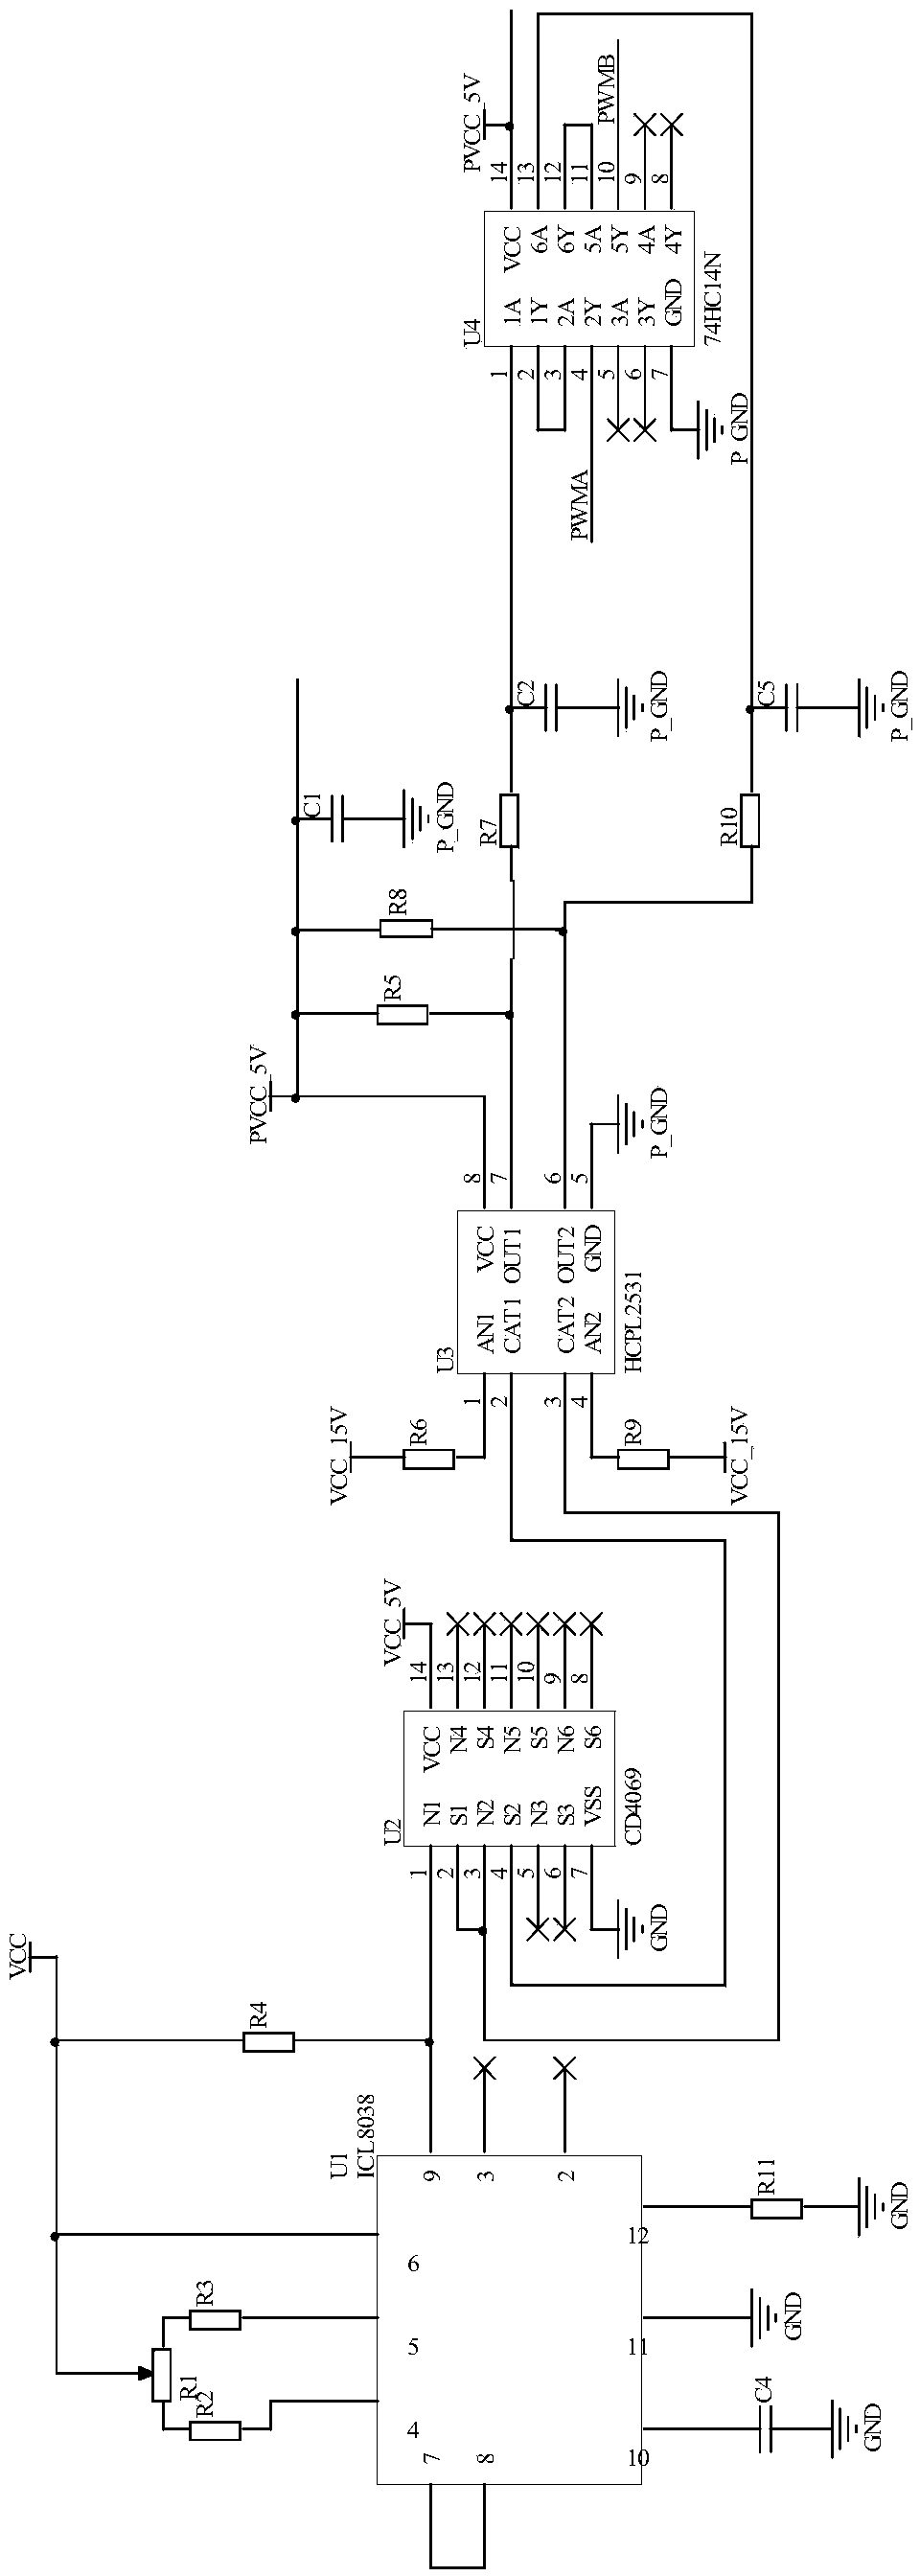 IGBT (Insulated Gate Bipolar Transistor) driving circuit with dead zone adjustment